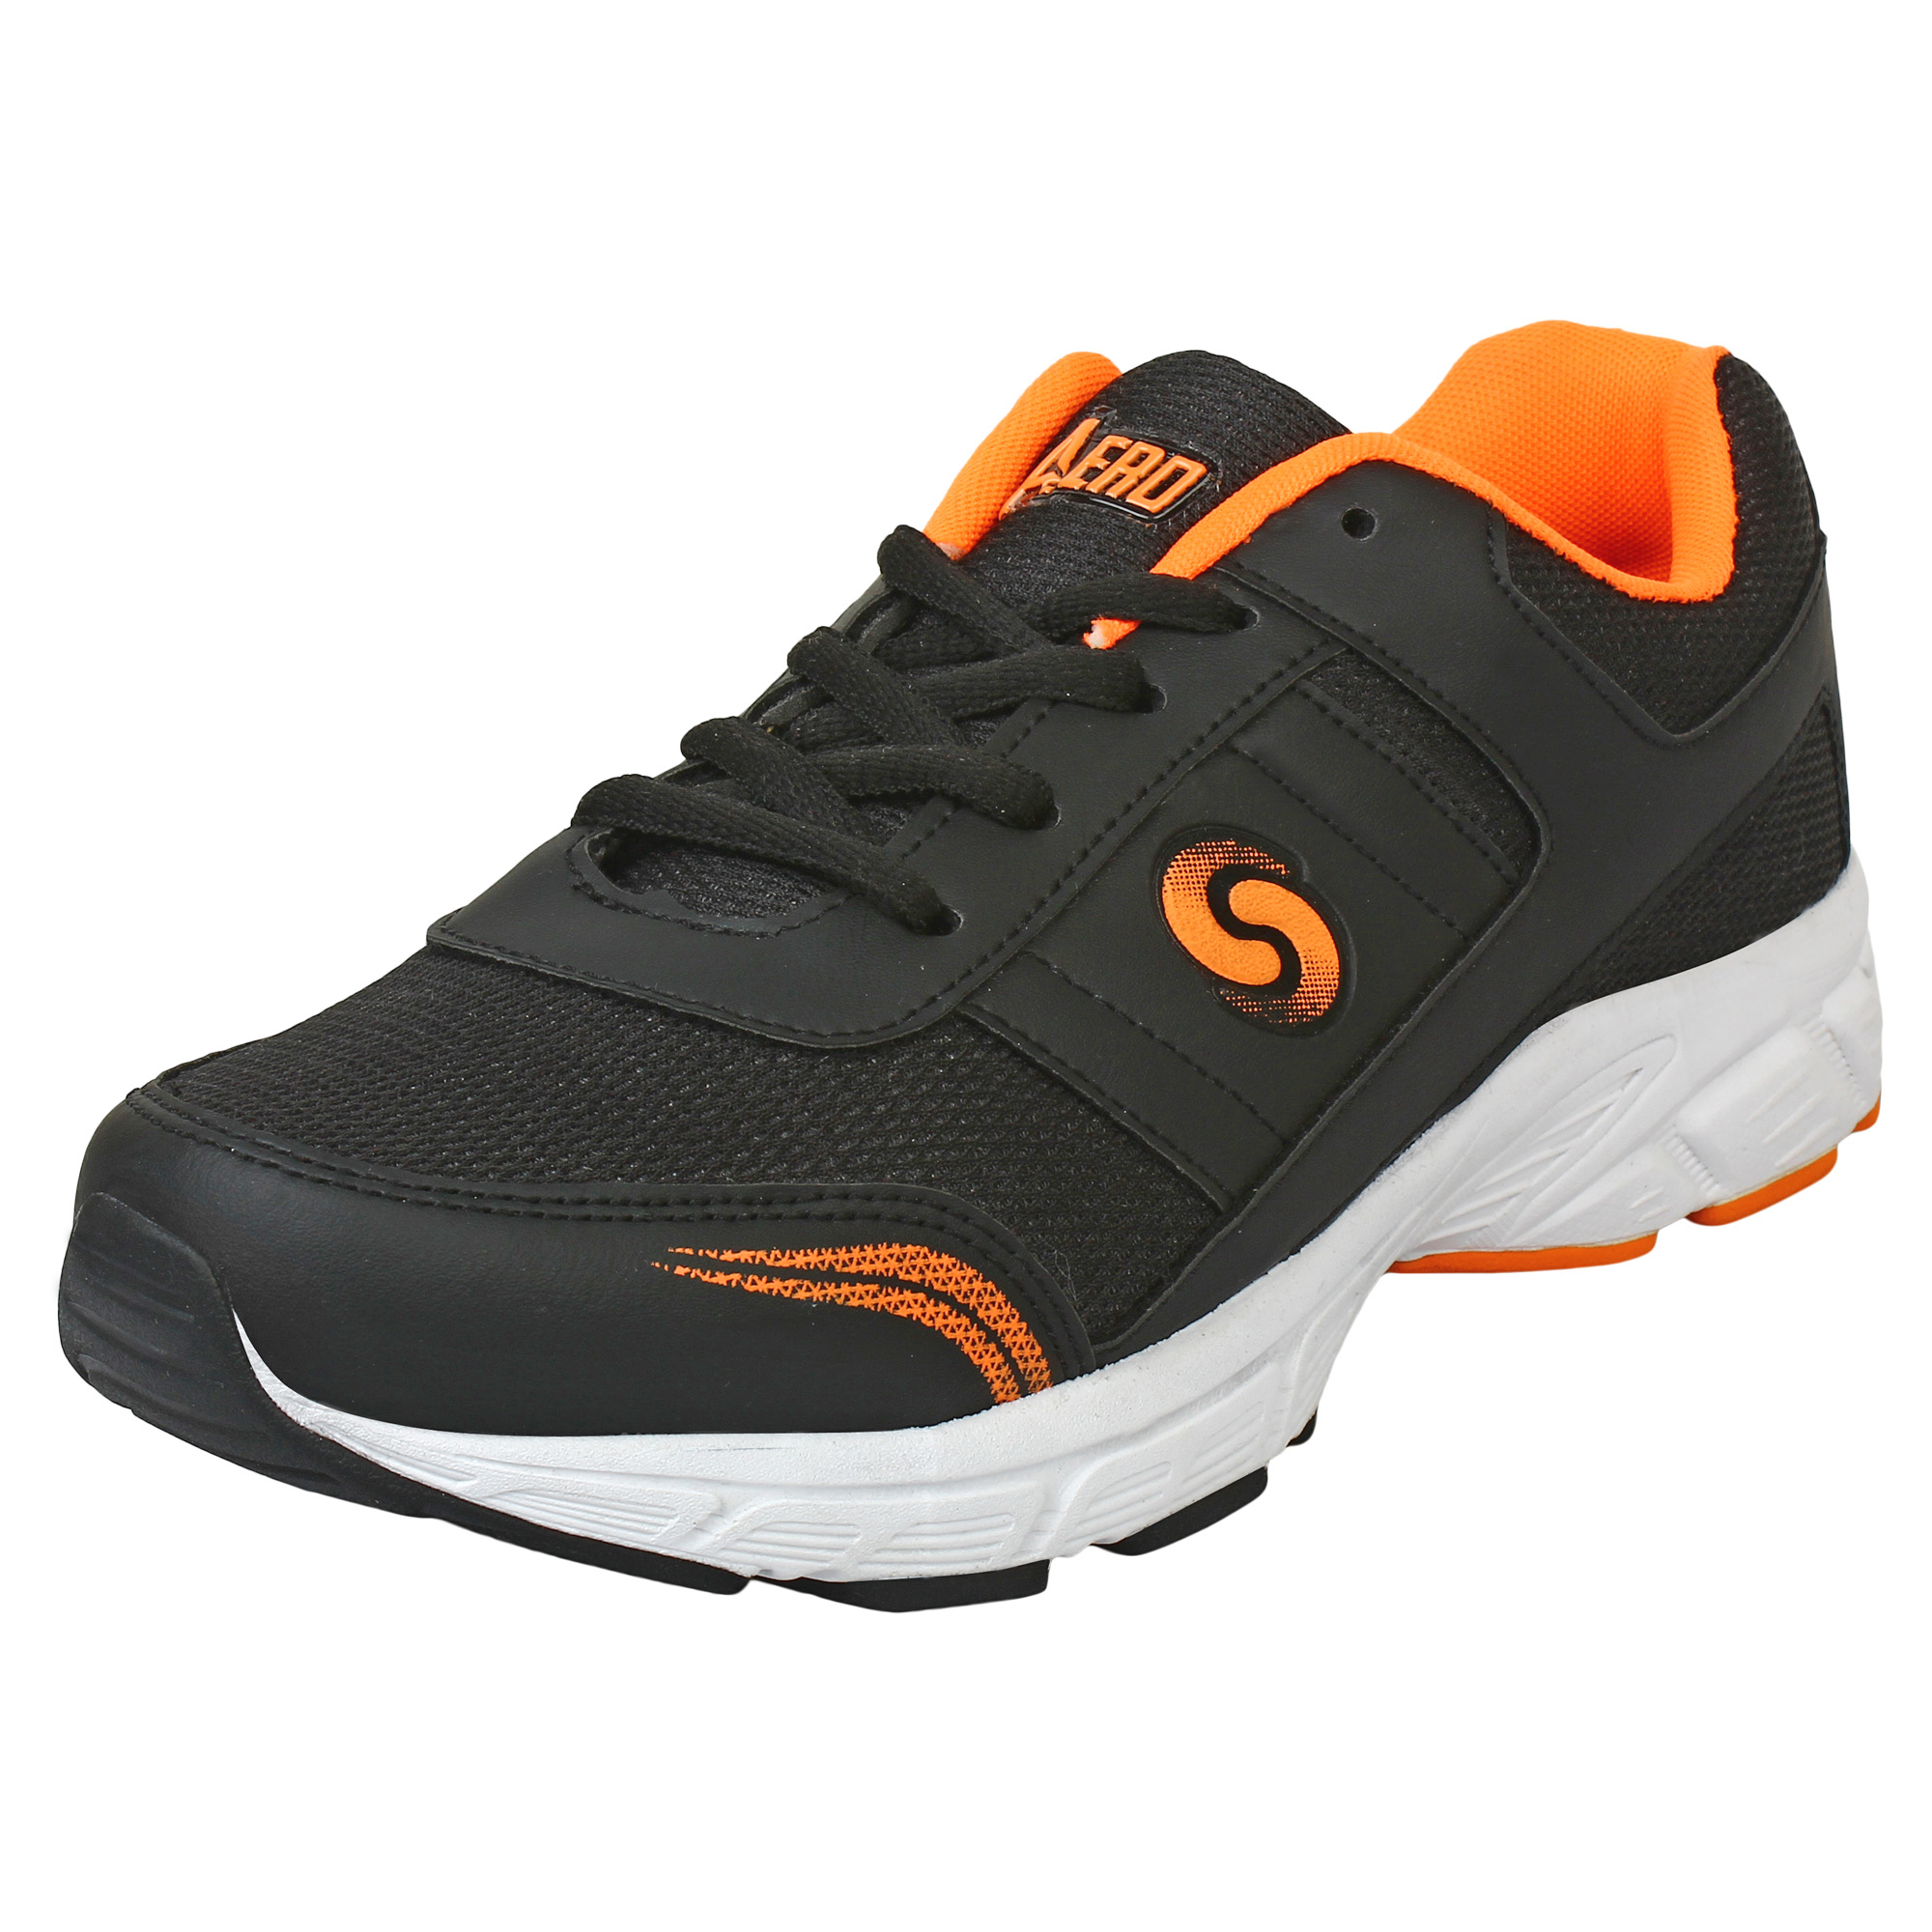 Buy Aero Black,Orange Lace-up Running Shoes for Men Online @ ₹1699 from ...